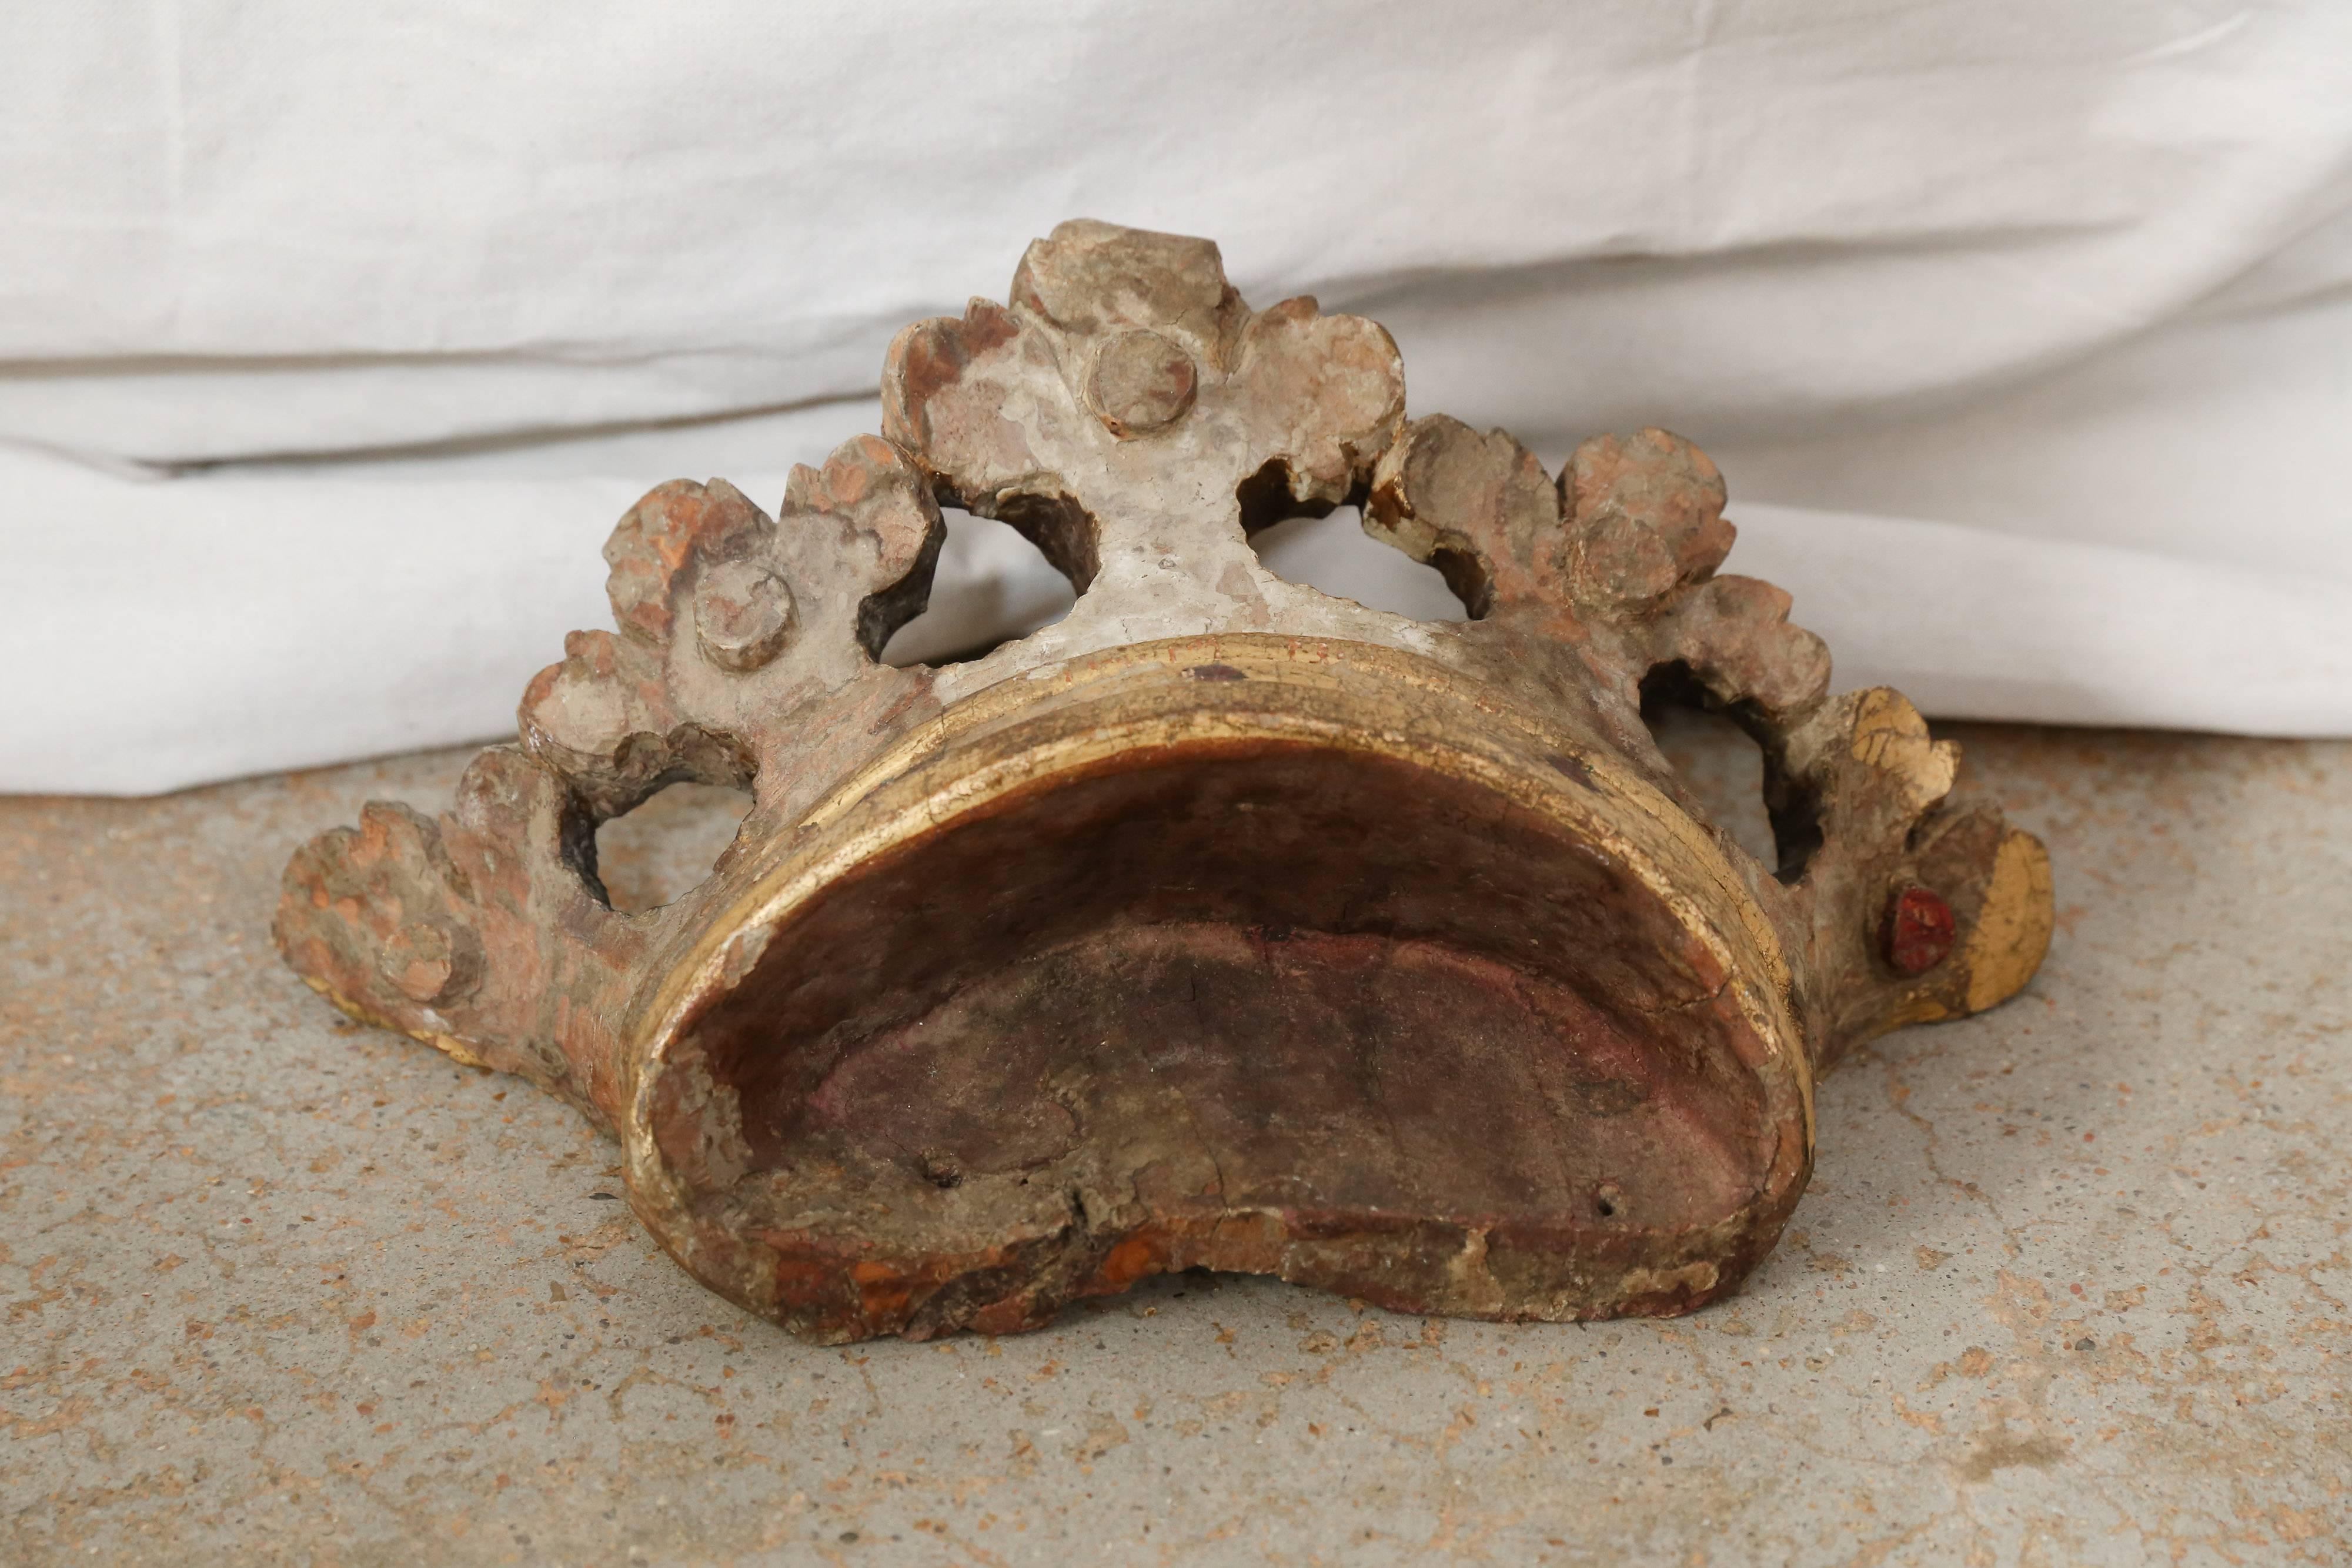 Remnants of gold paint with minimal detailing in red adorn this marvellous wooden fragment. Display on its own or utilize above a child's tester bed as a drapery crown.